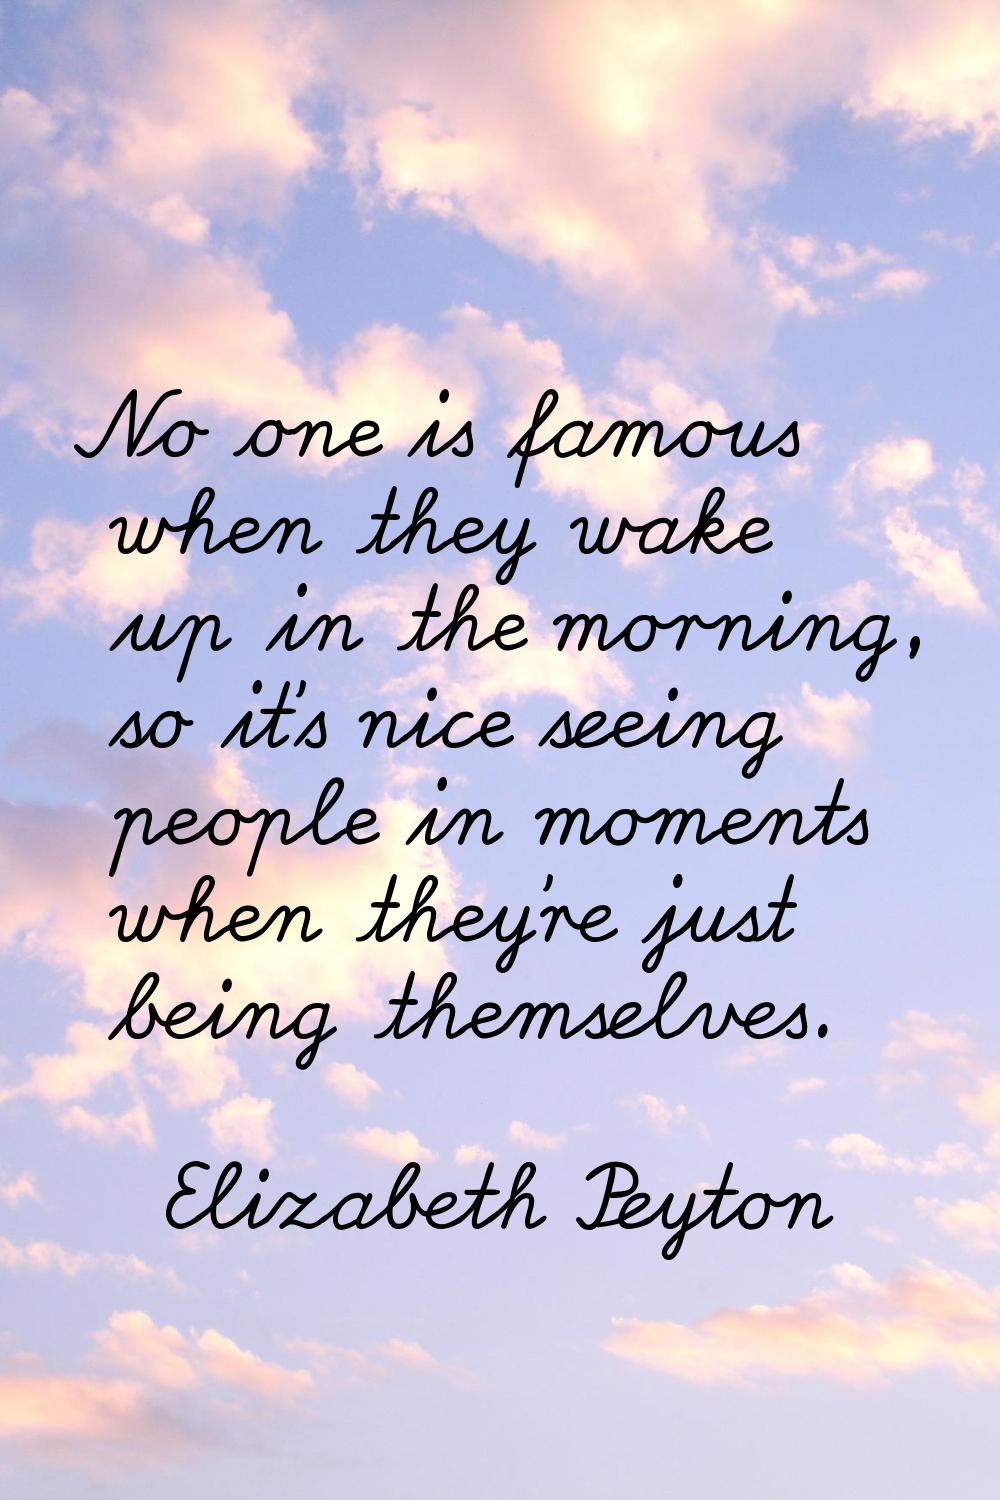 No one is famous when they wake up in the morning, so it's nice seeing people in moments when they'